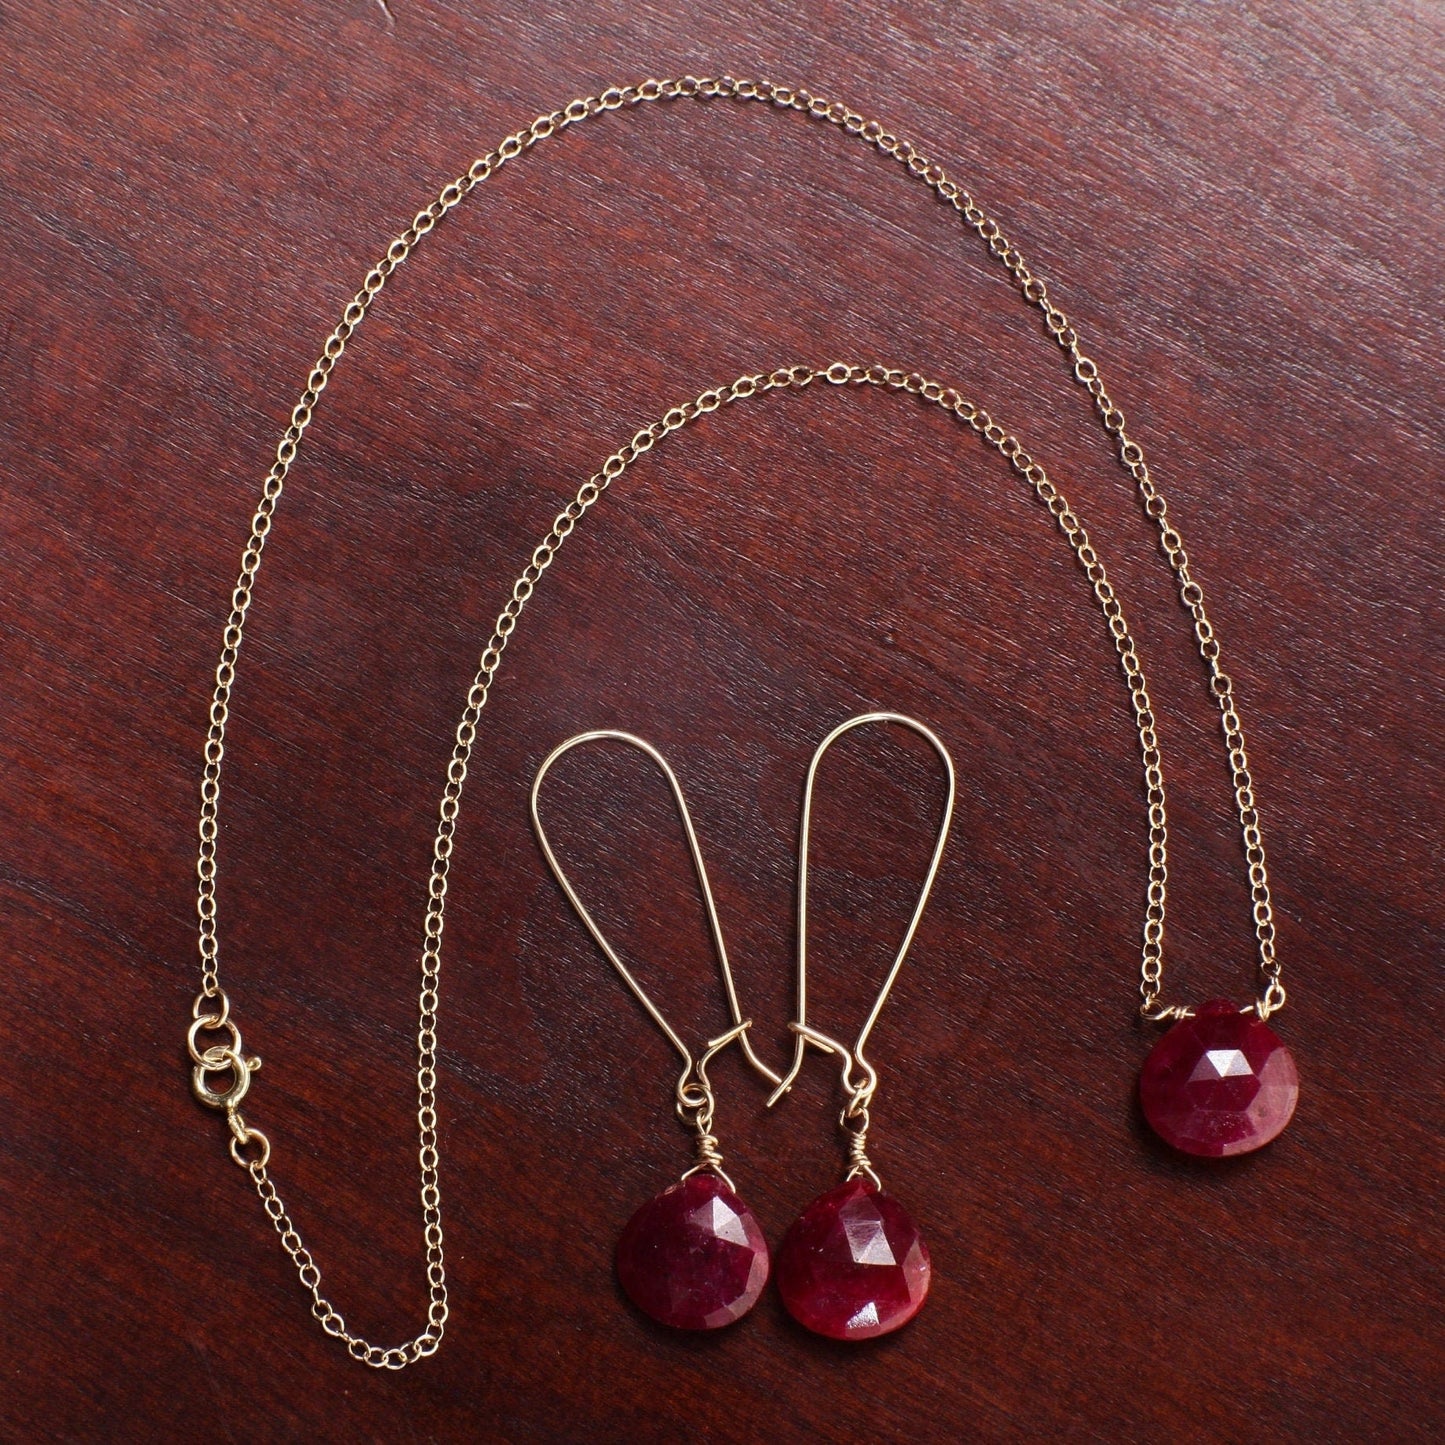 Ruby Necklace Set, Genuine Ruby Faceted 12mm Heart Briolette Teardrop Earrings and Necklace in 14K Gold Filled Cable Chain & Kidney Earwire